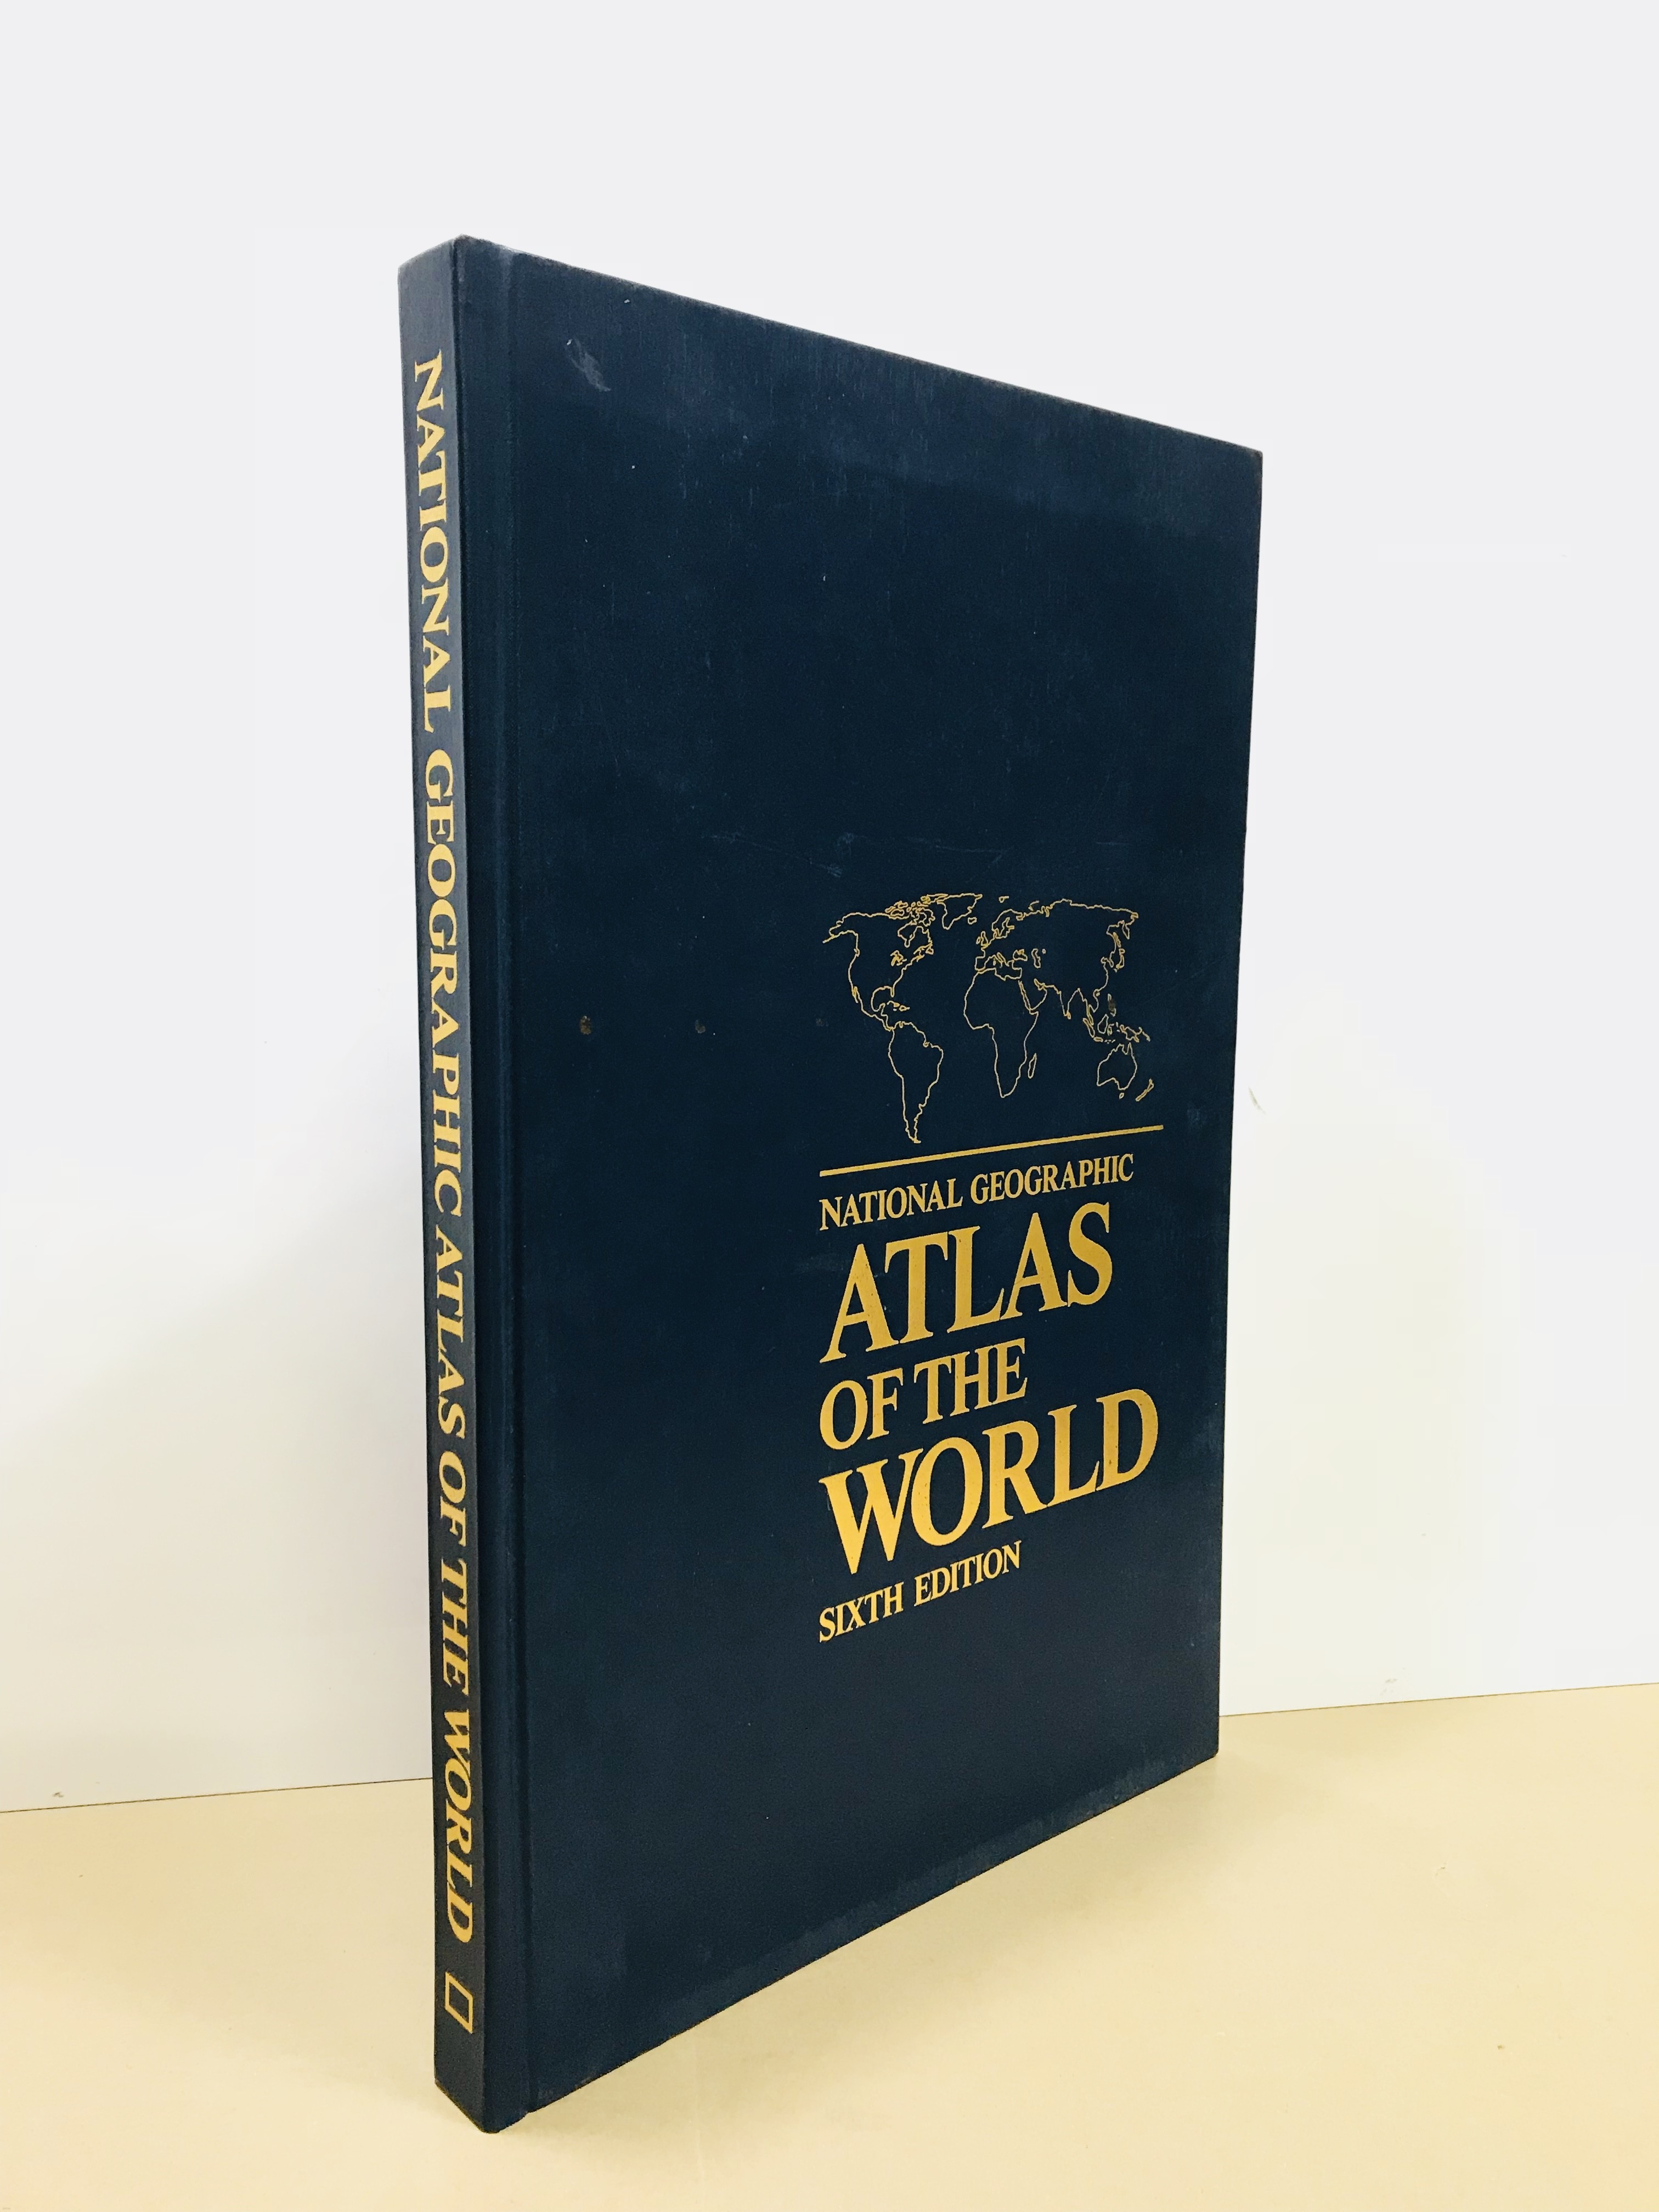 [߰ ] National Geographic Atlas of the World (Sixth Edition)